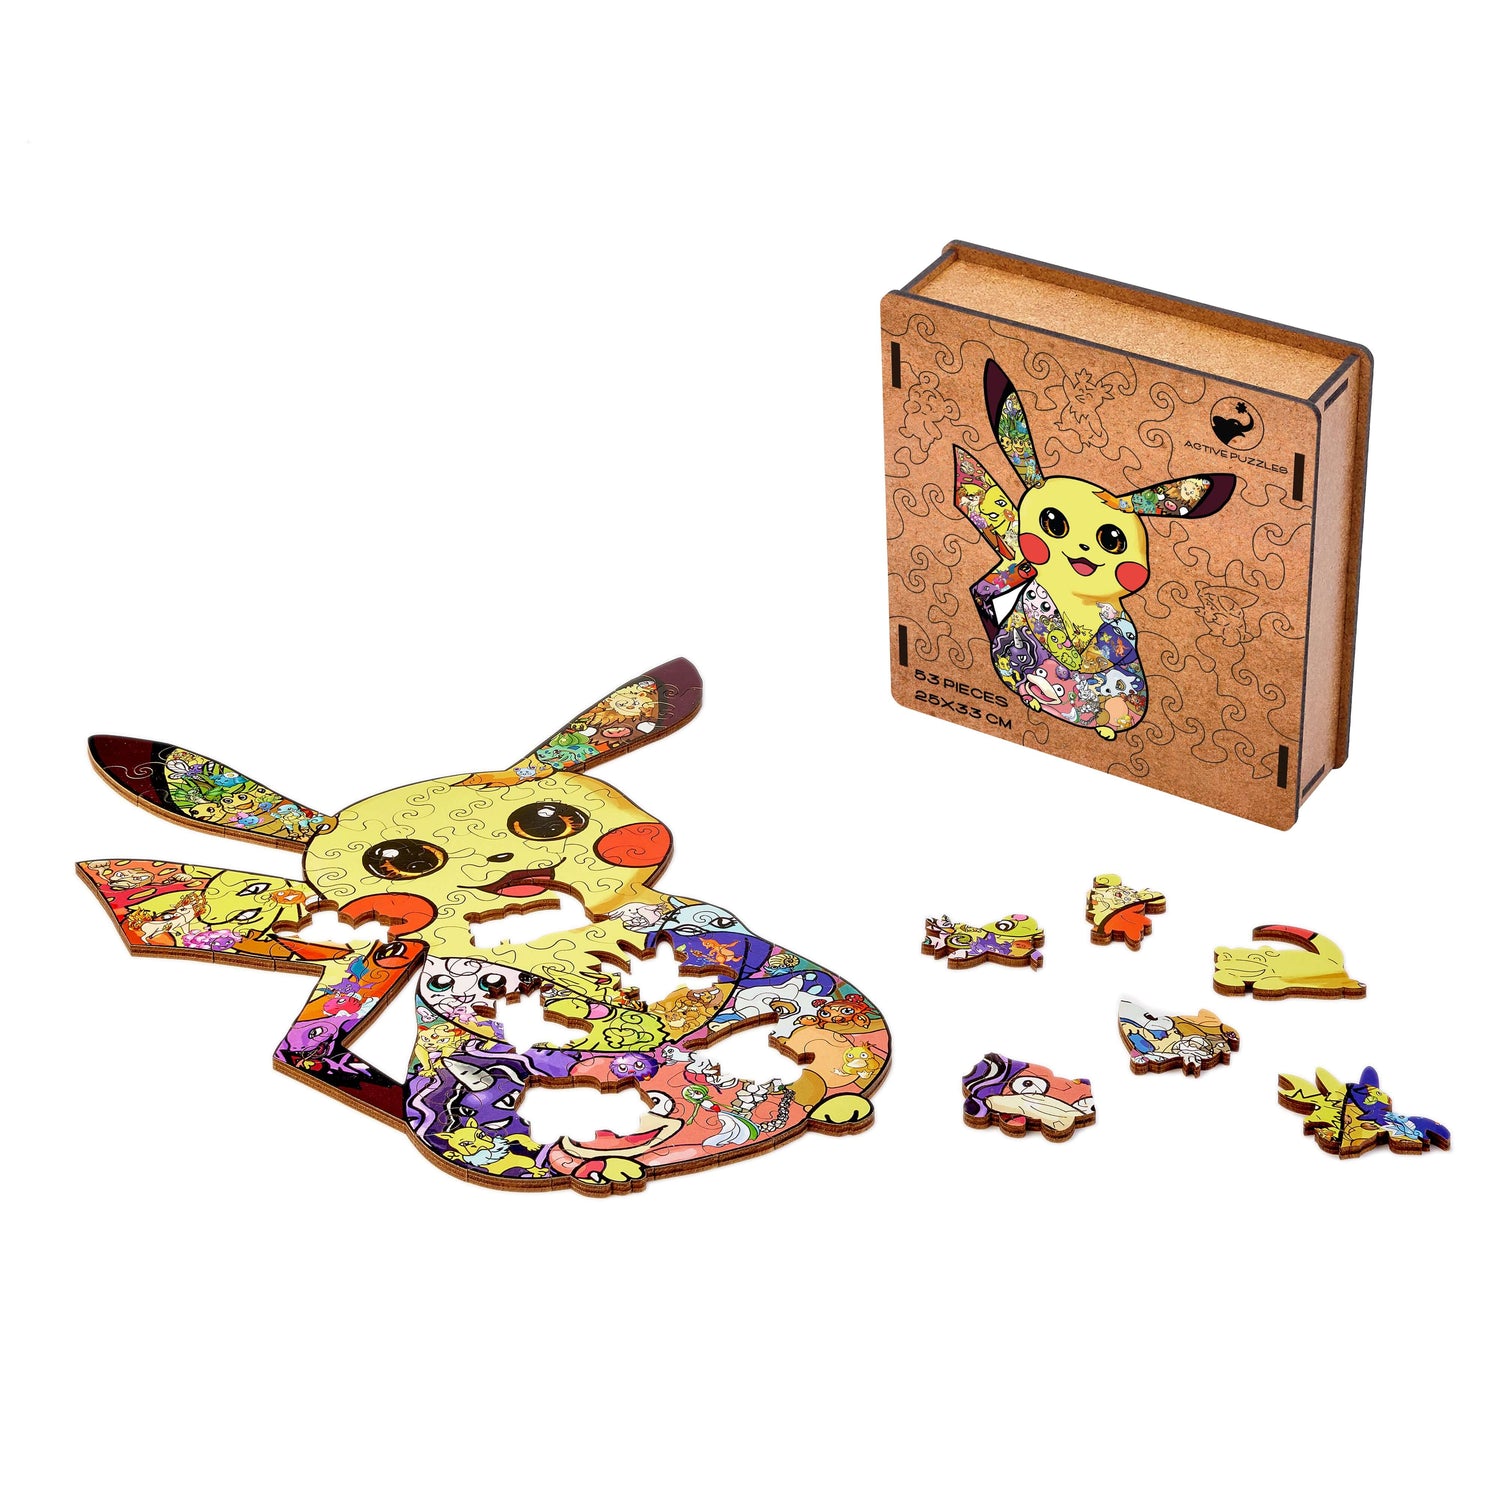 Charizard Wooden Puzzle